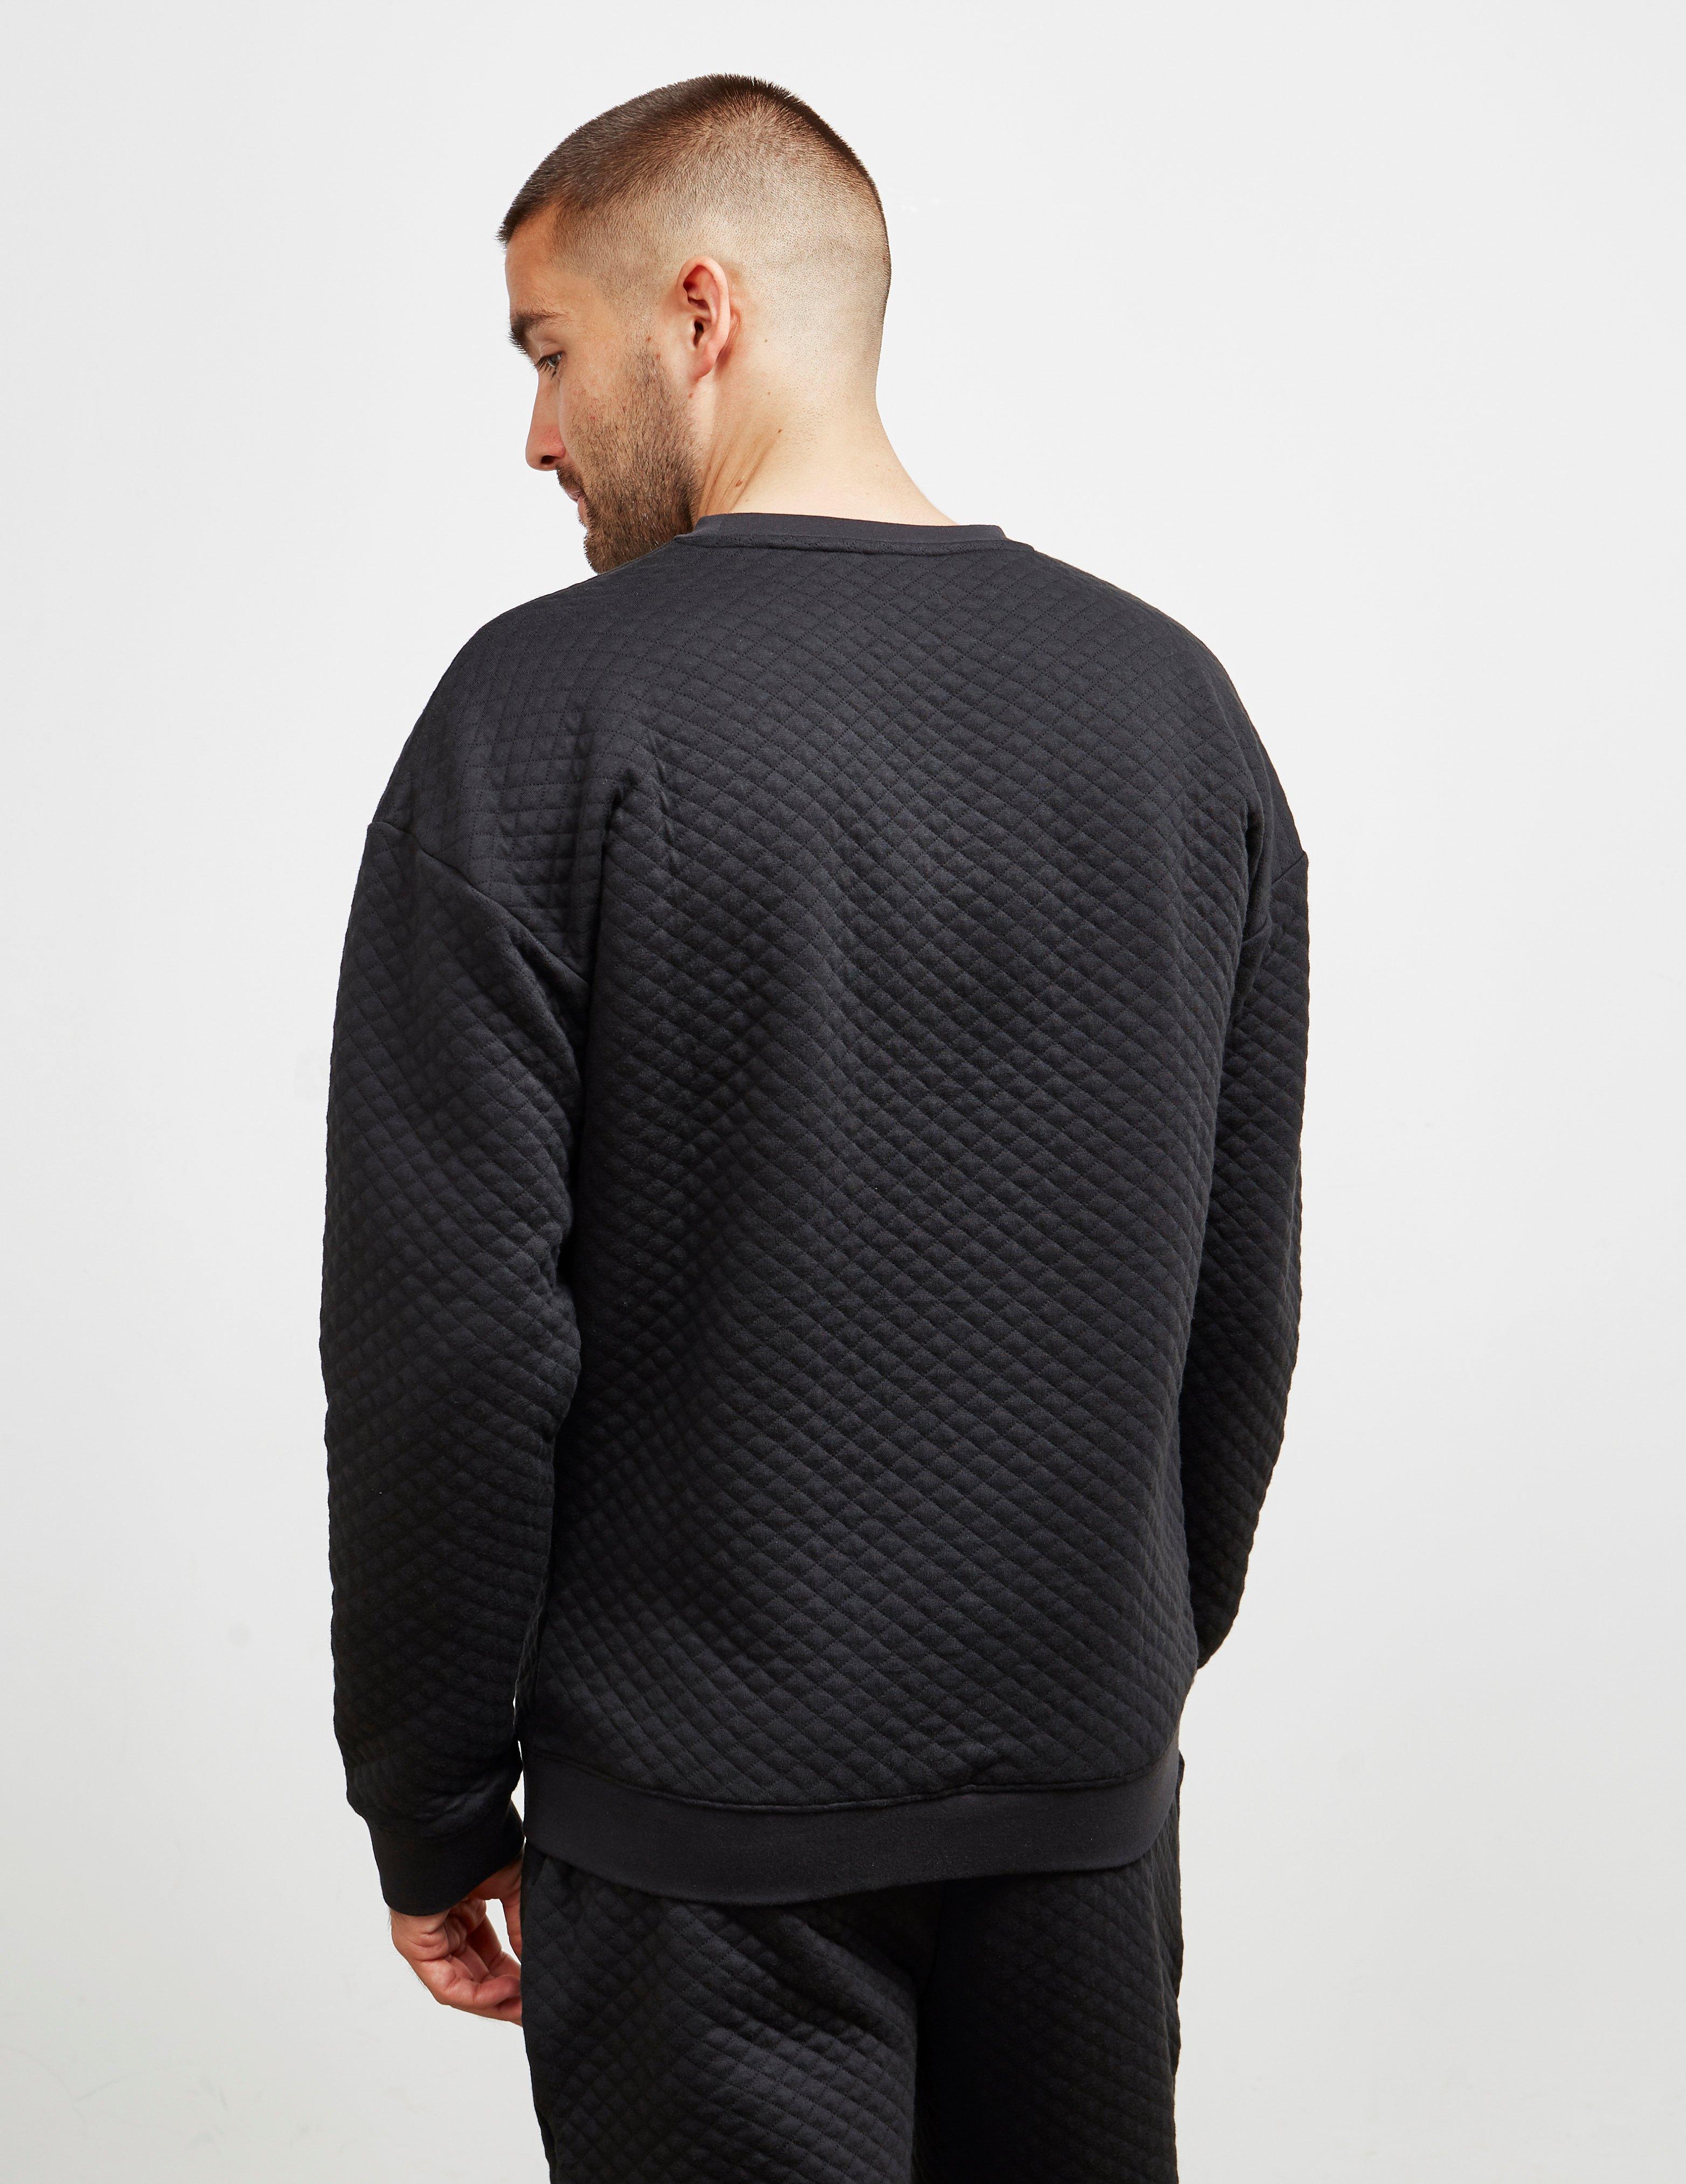 BOSS by HUGO BOSS Quilted Embroidered Sweatshirt Black for Men - Lyst